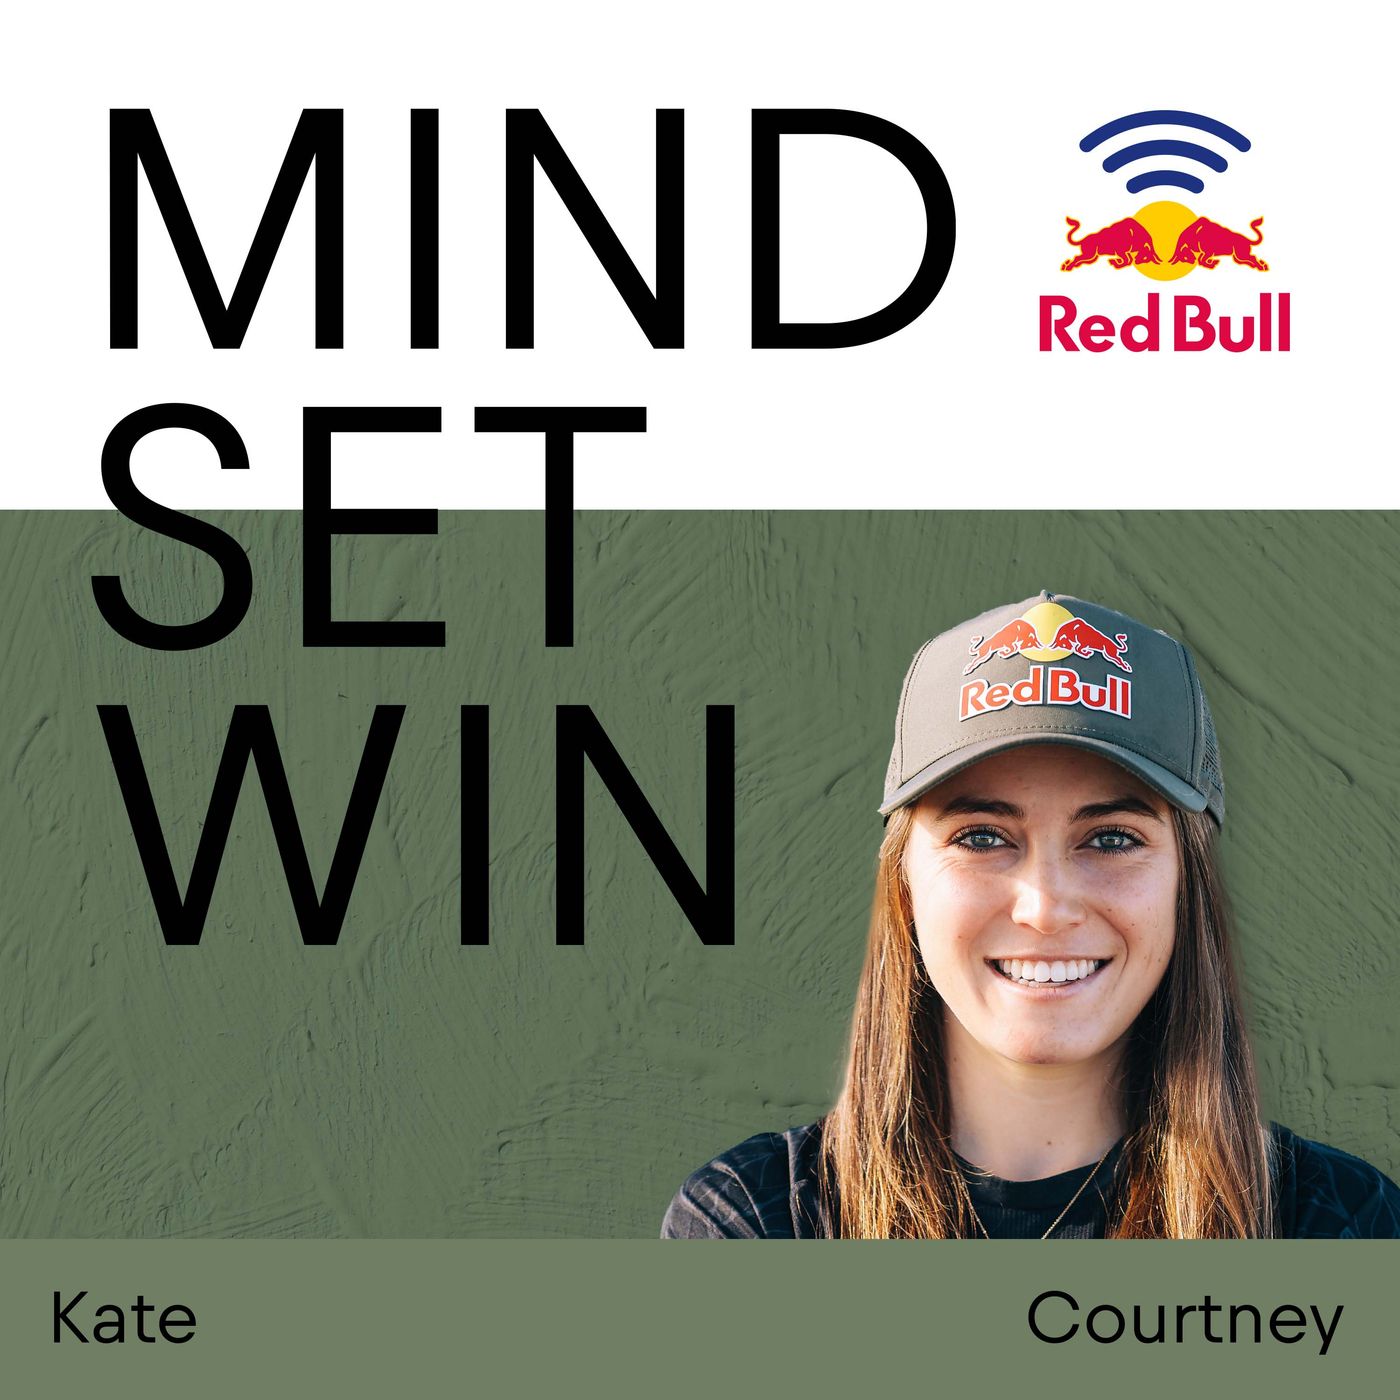 Welcoming Kate Courtney to the Mind Set Win hosting team